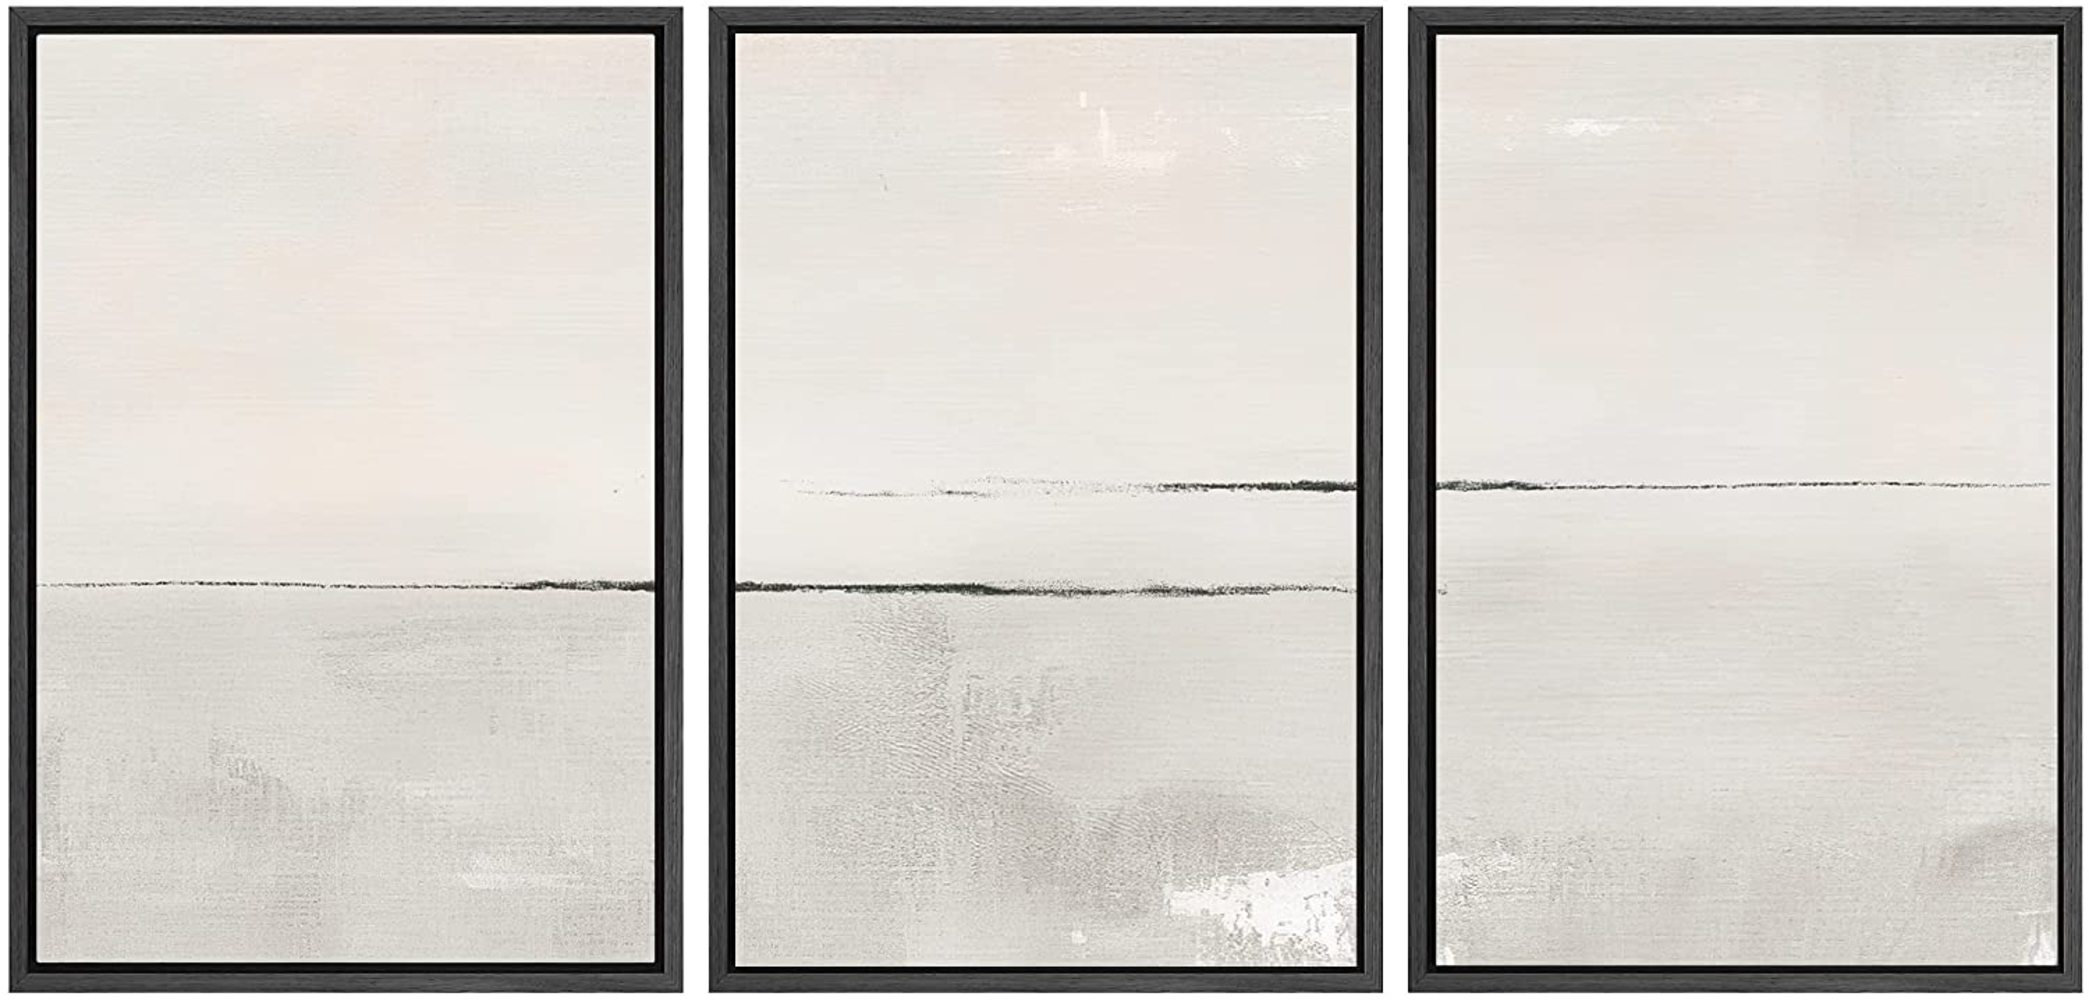 Abstract Duotone Pastel Minimalist Landscape Wall Art Framed On Canvas - Set  of 3 at